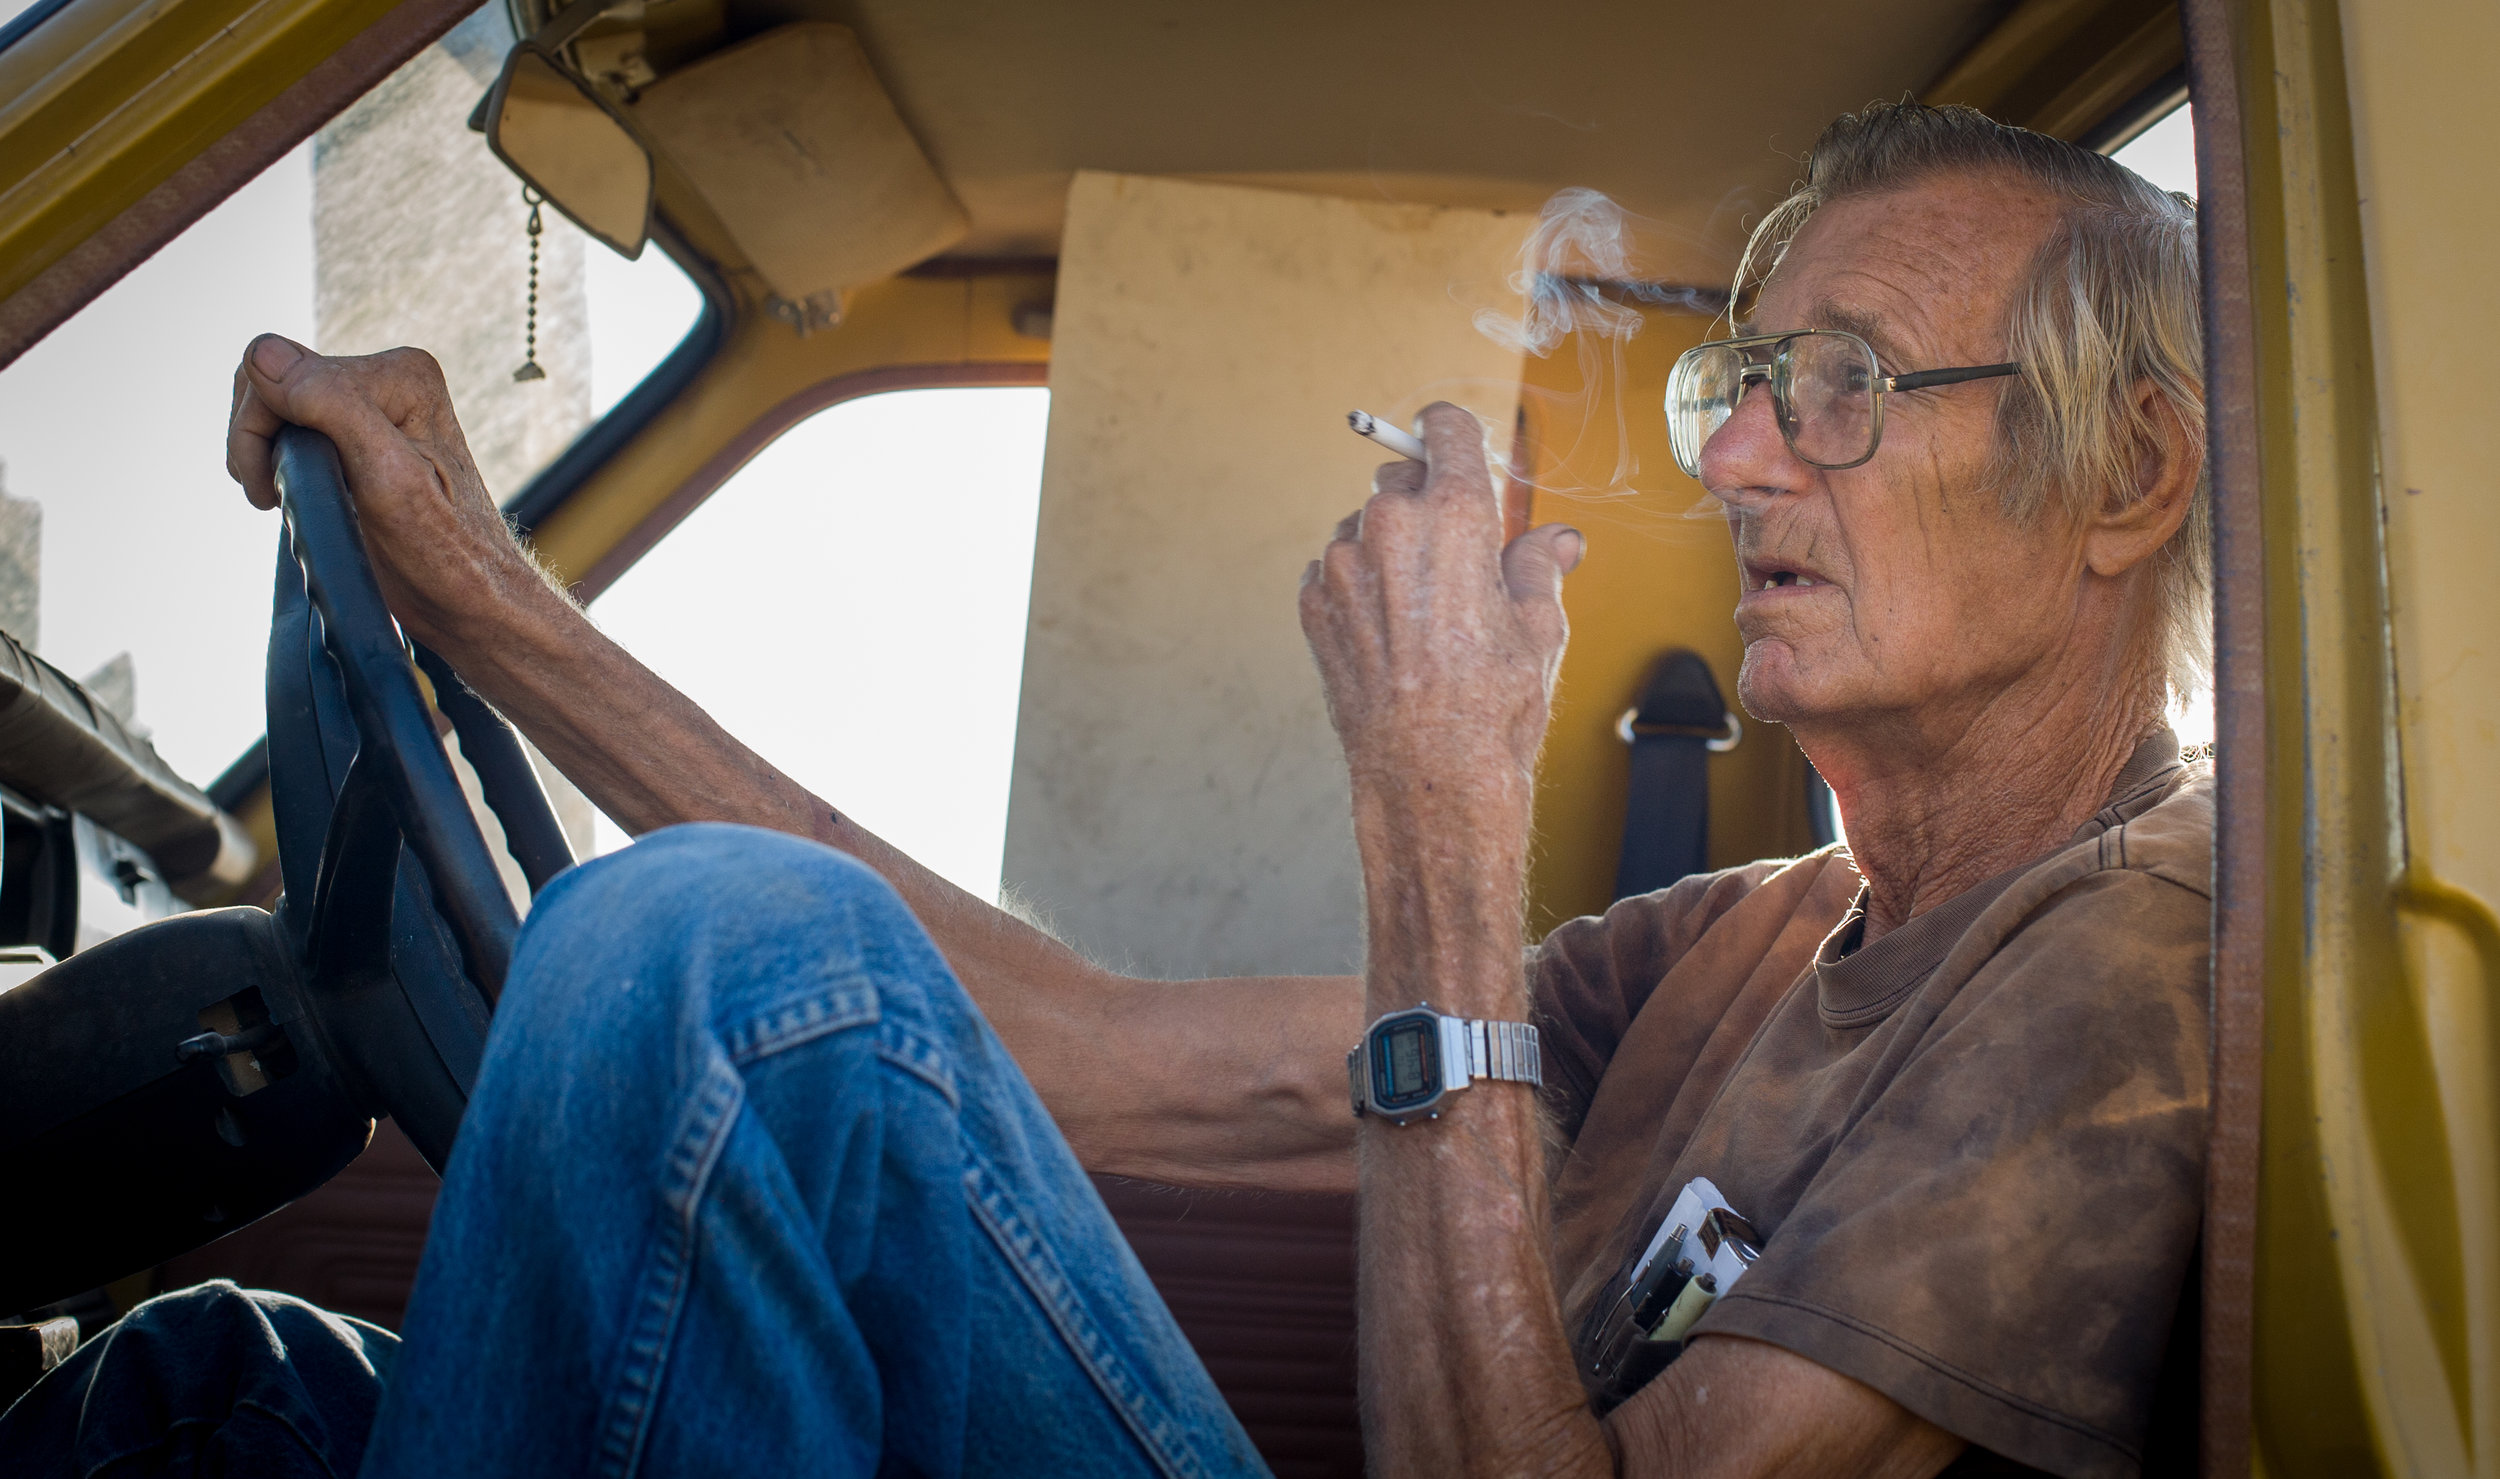  A mechanic takes a smoke break before starting the work day August 10, 2010, in Odessa, Texas. 